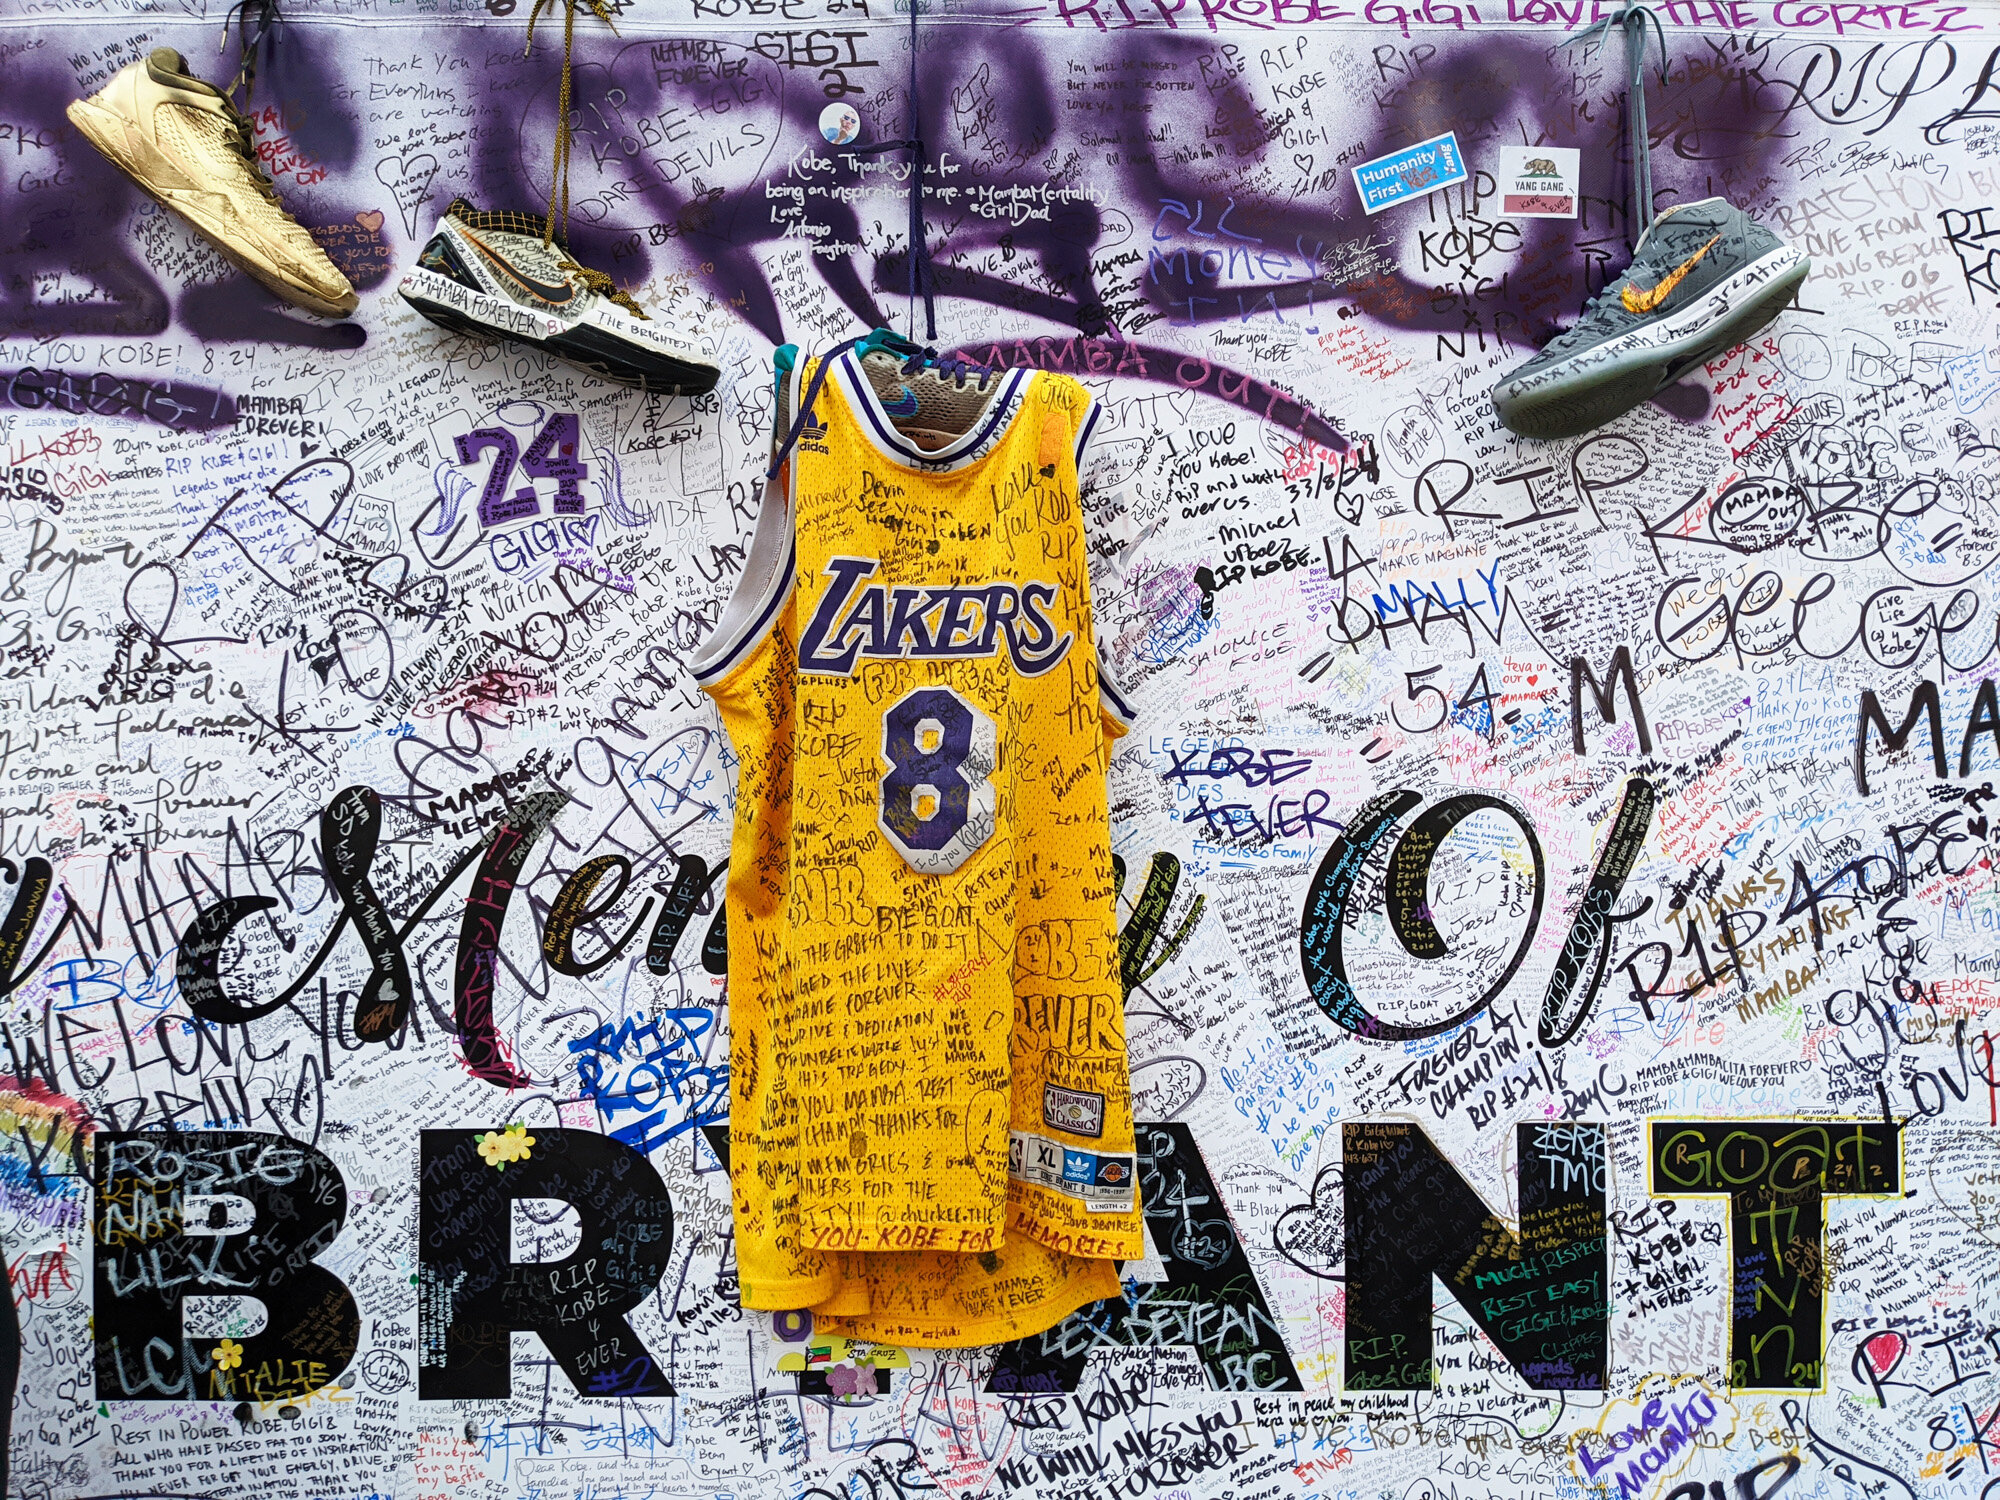  Sneakers and a Los Angeles Lakers jersey with the number 8 worn by NBA star Kobe Bryant hang at a memorial for Bryant in Los Angeles on Feb. 2, 2020, a week after he was killed in a helicopter crash. (AP Photo/Damian Dovarganes) 